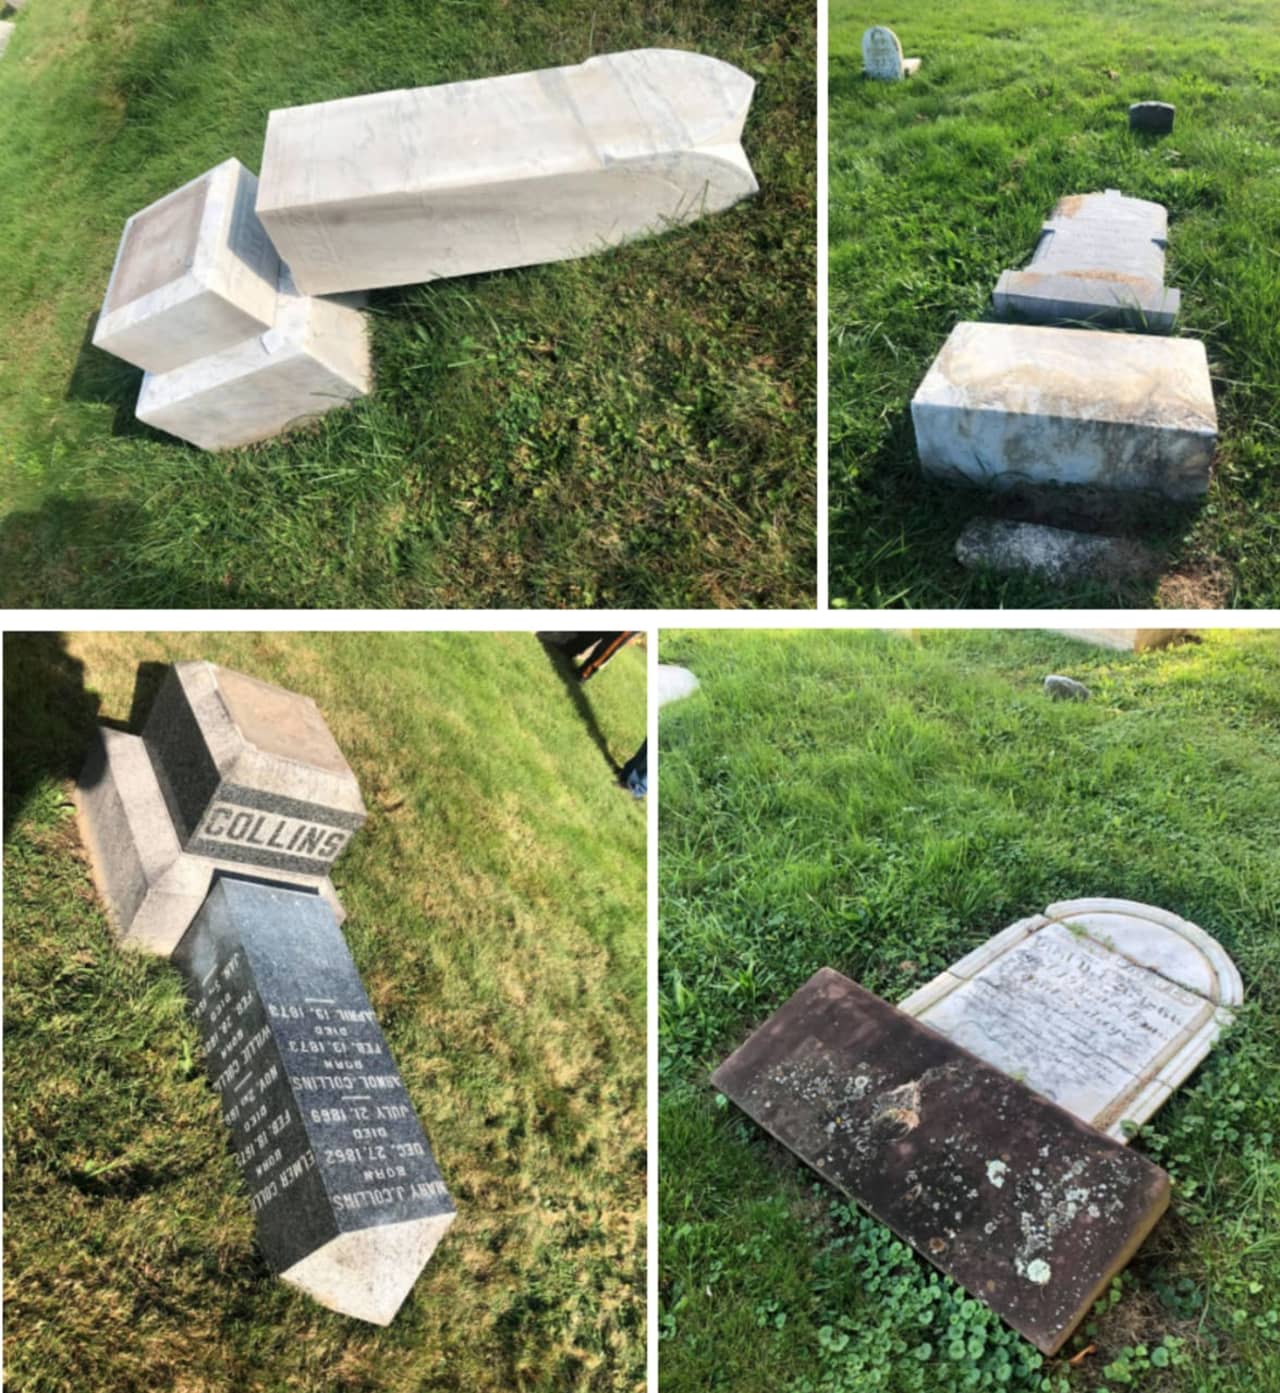 The historic Orchard Street Cemetery in Dover cemetery was brutally vandalized overnight Sunday.